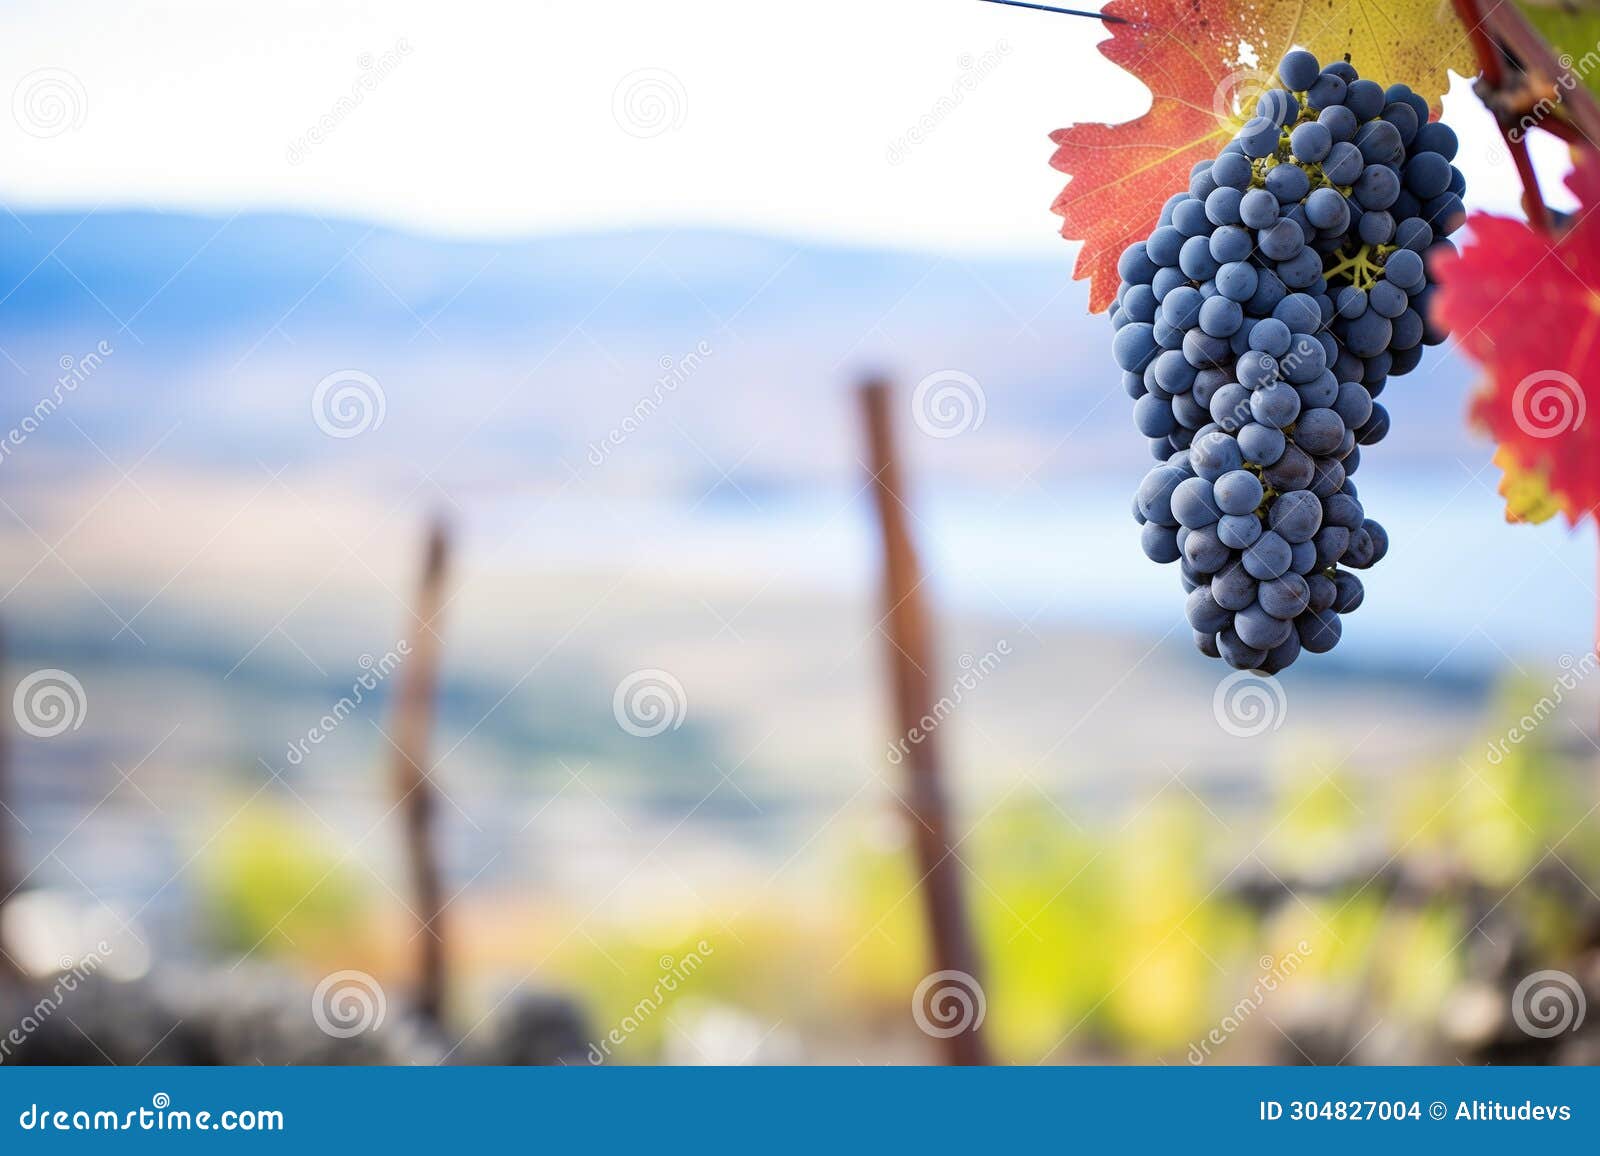 syrah grape bunch with a backdrop of wine valleys